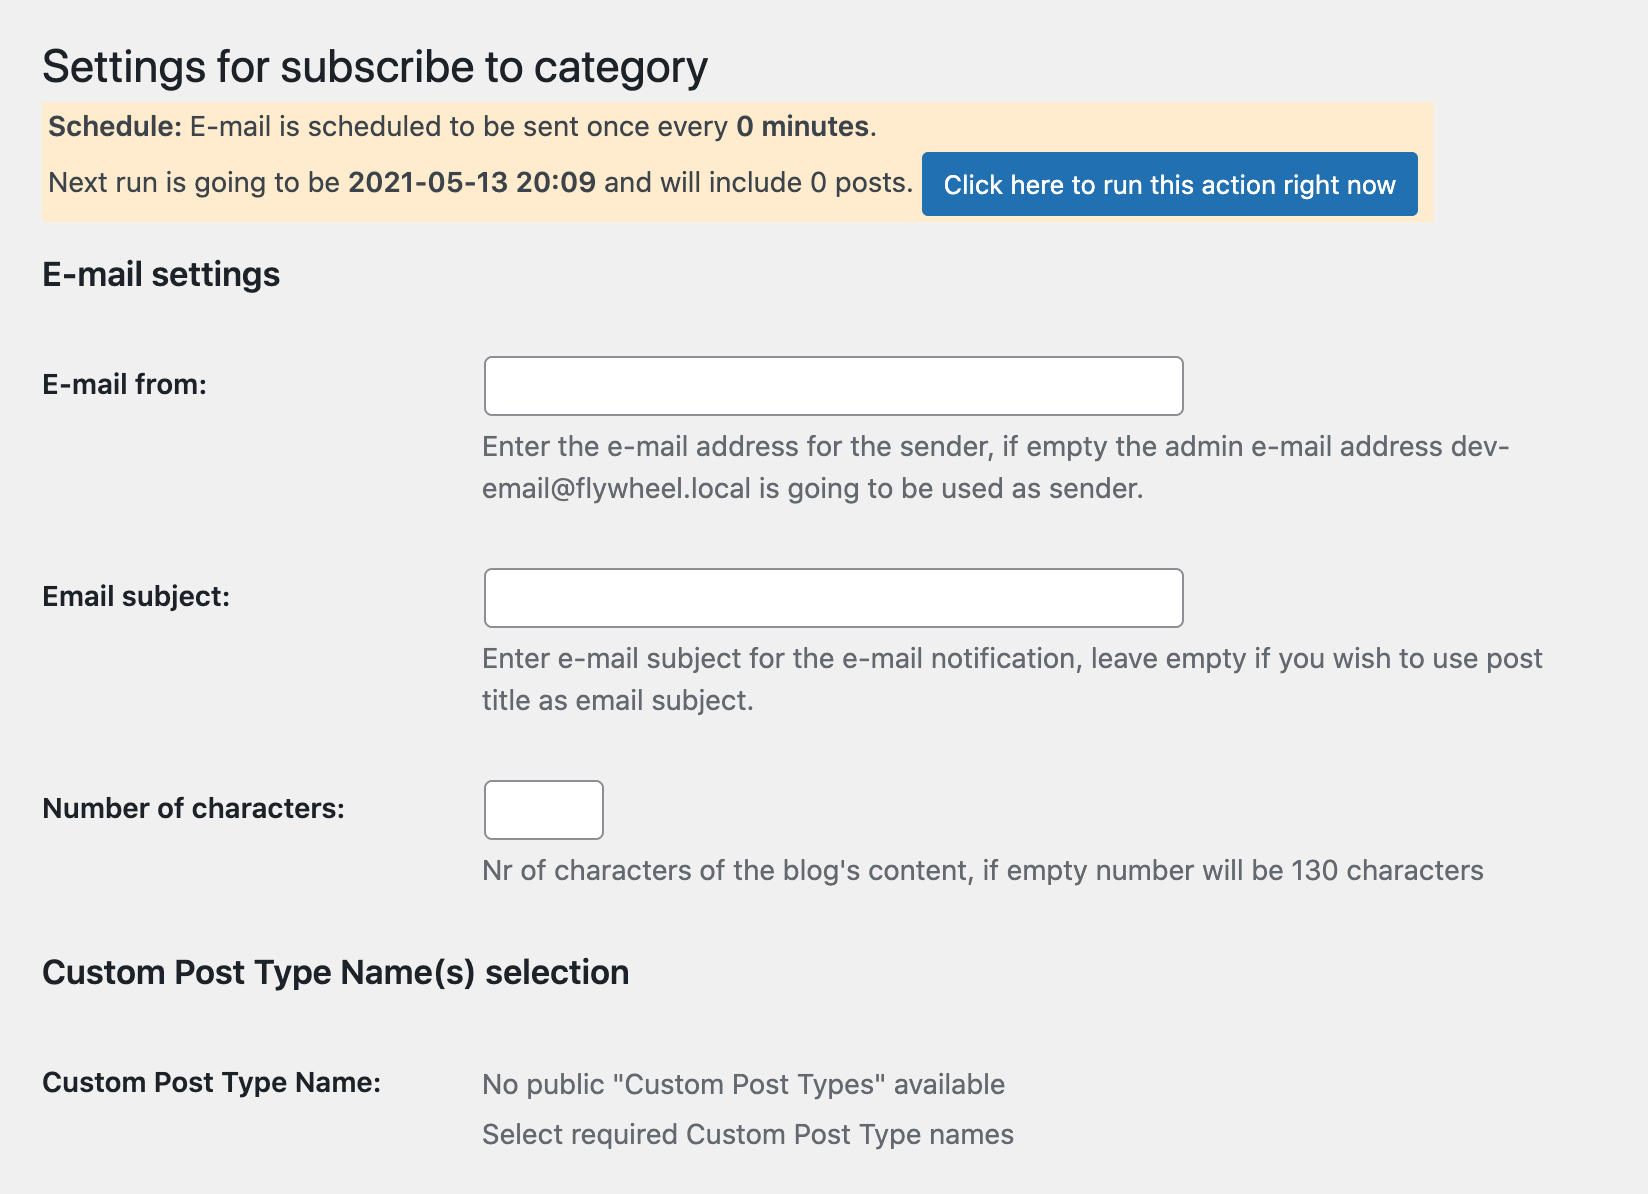 Configuring the Subscribe to Category settings.